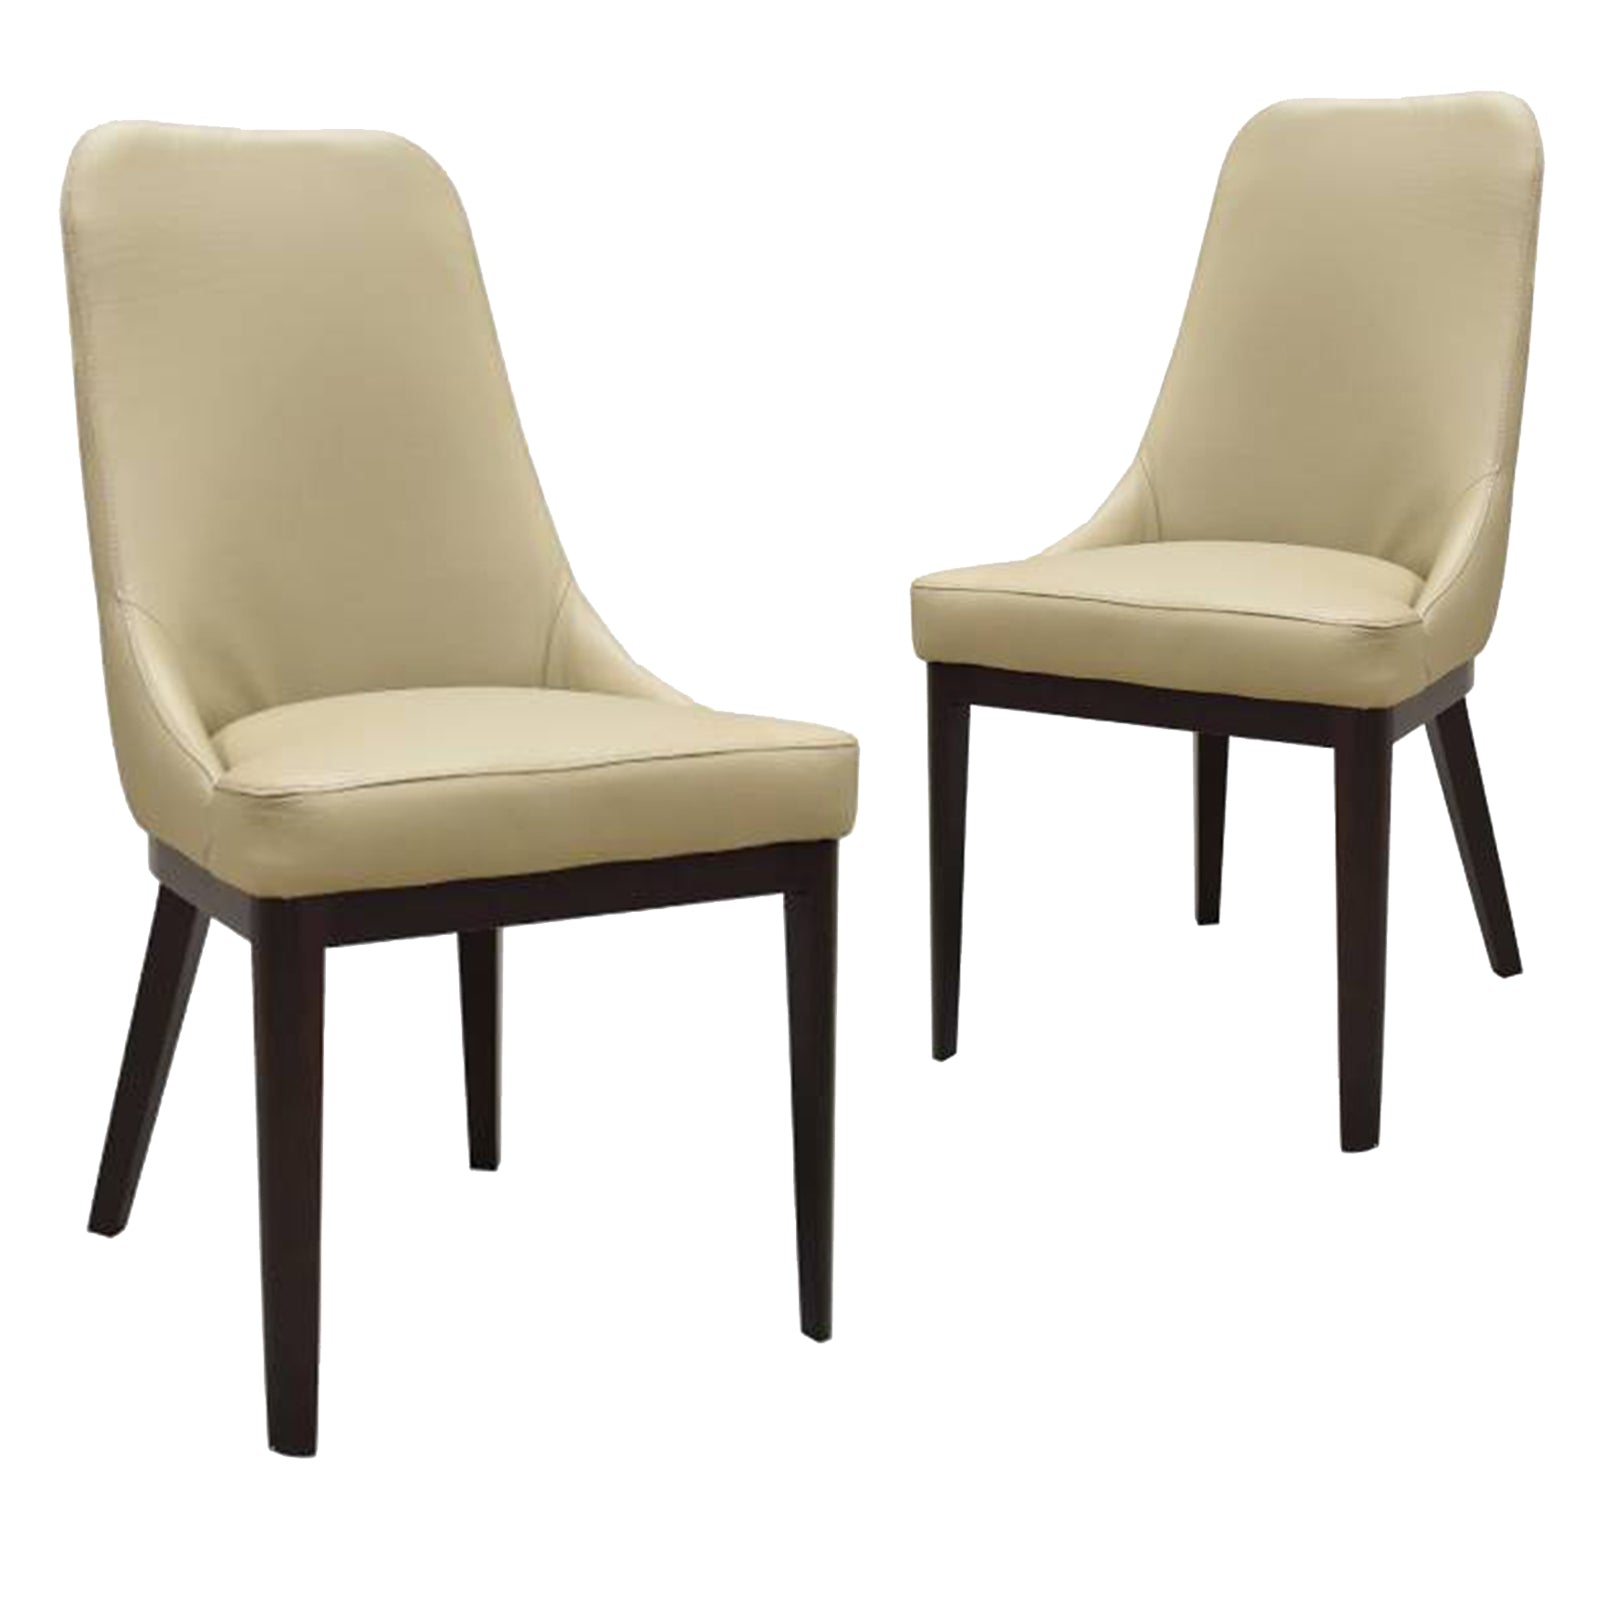 Langdon | Contemporary PU Leather Dining Chairs | Set Of 2 | Beige